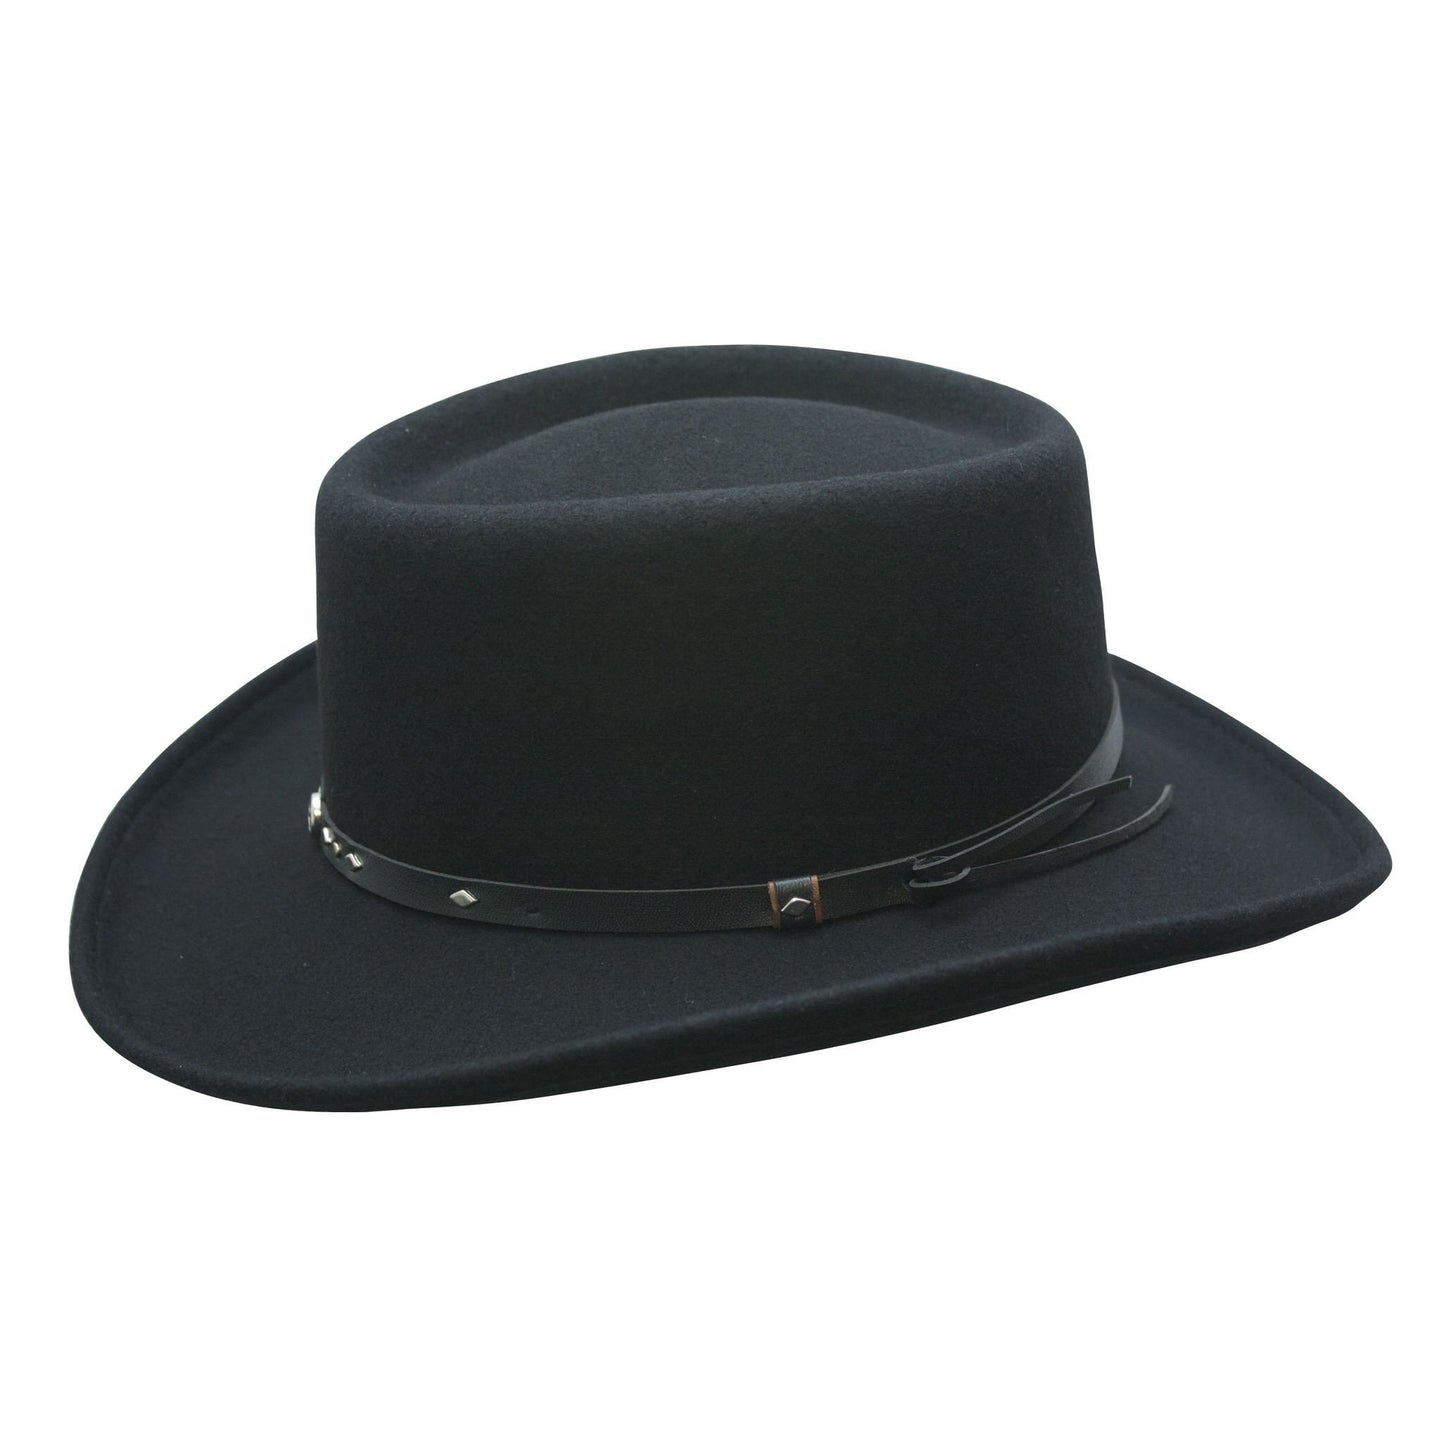 Black wool gambler hat with vegan band with silver colored studs